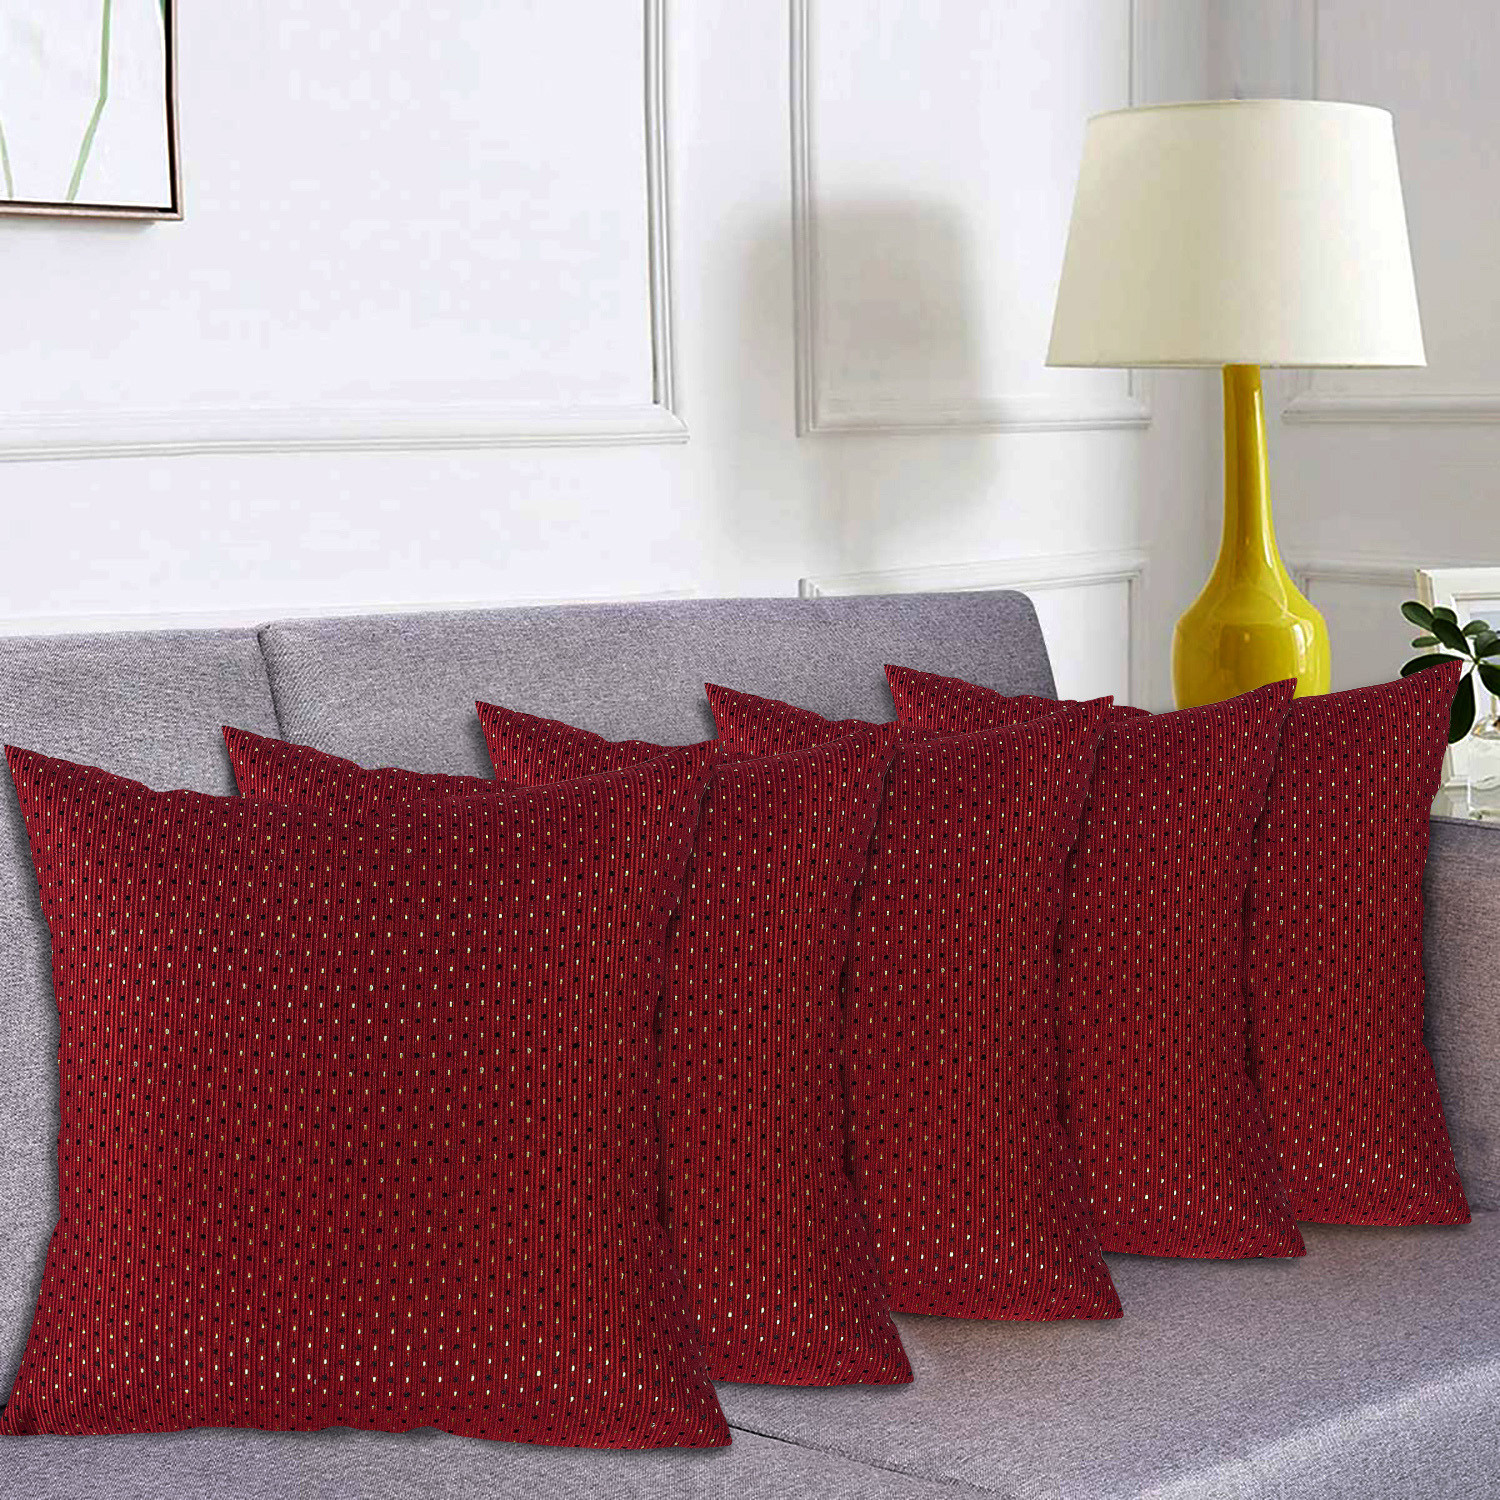 Kuber Industries Dot Print Soft Decorative Square Cushion Cover, Cushion Case For Sofa Couch Bed 16x16 Inch-(Maroon)